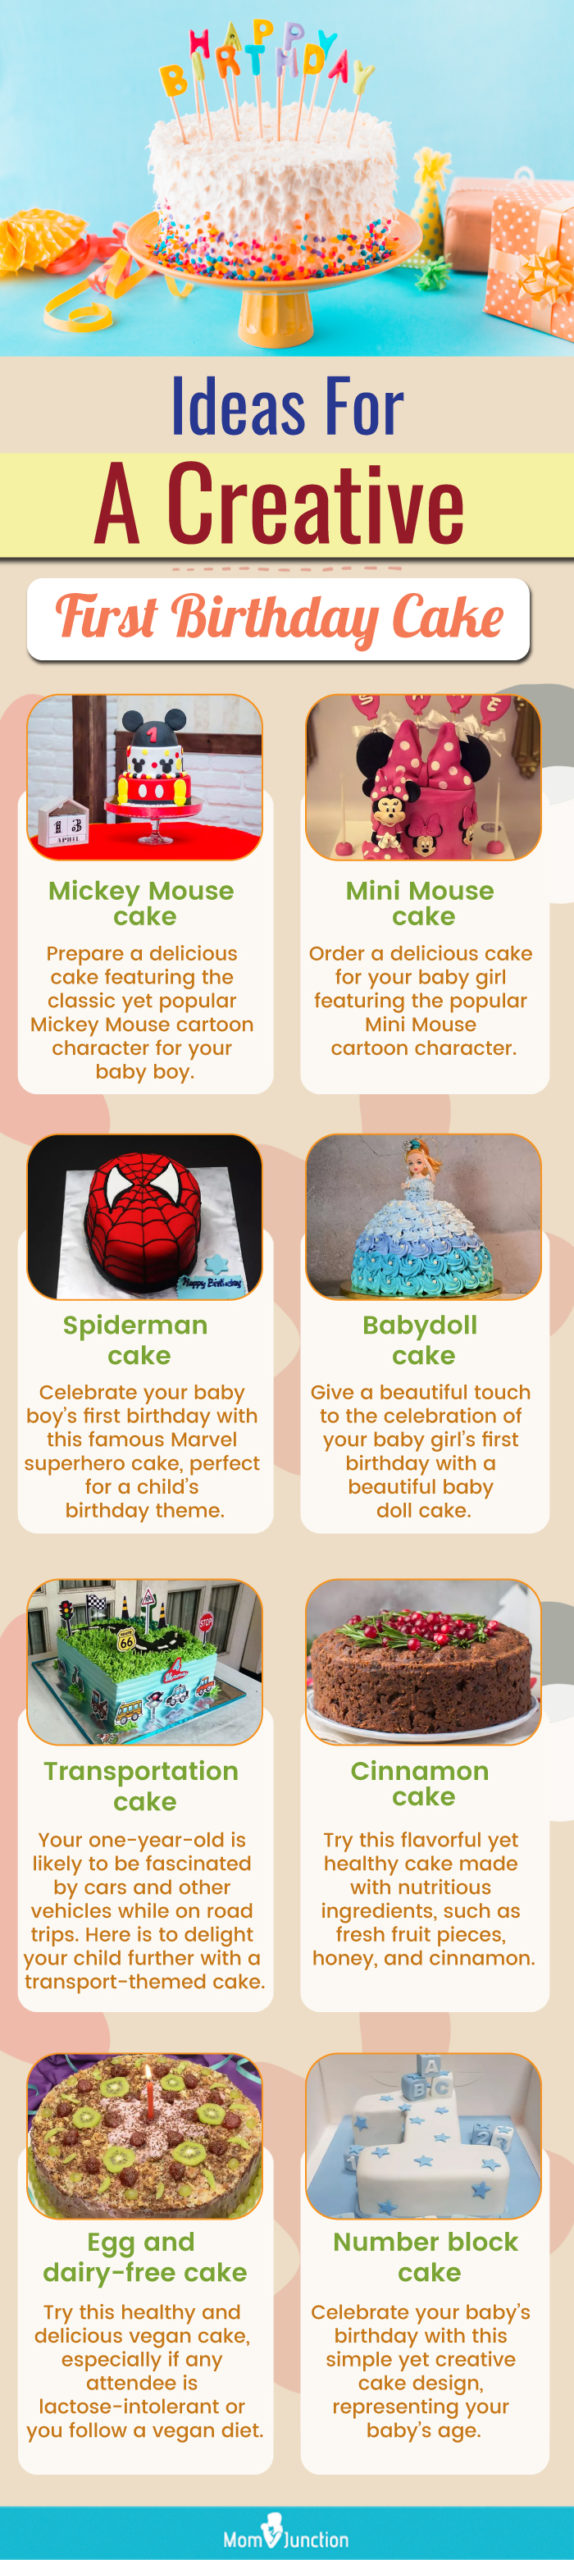 ideas for a creative first birthday cake (infographic)